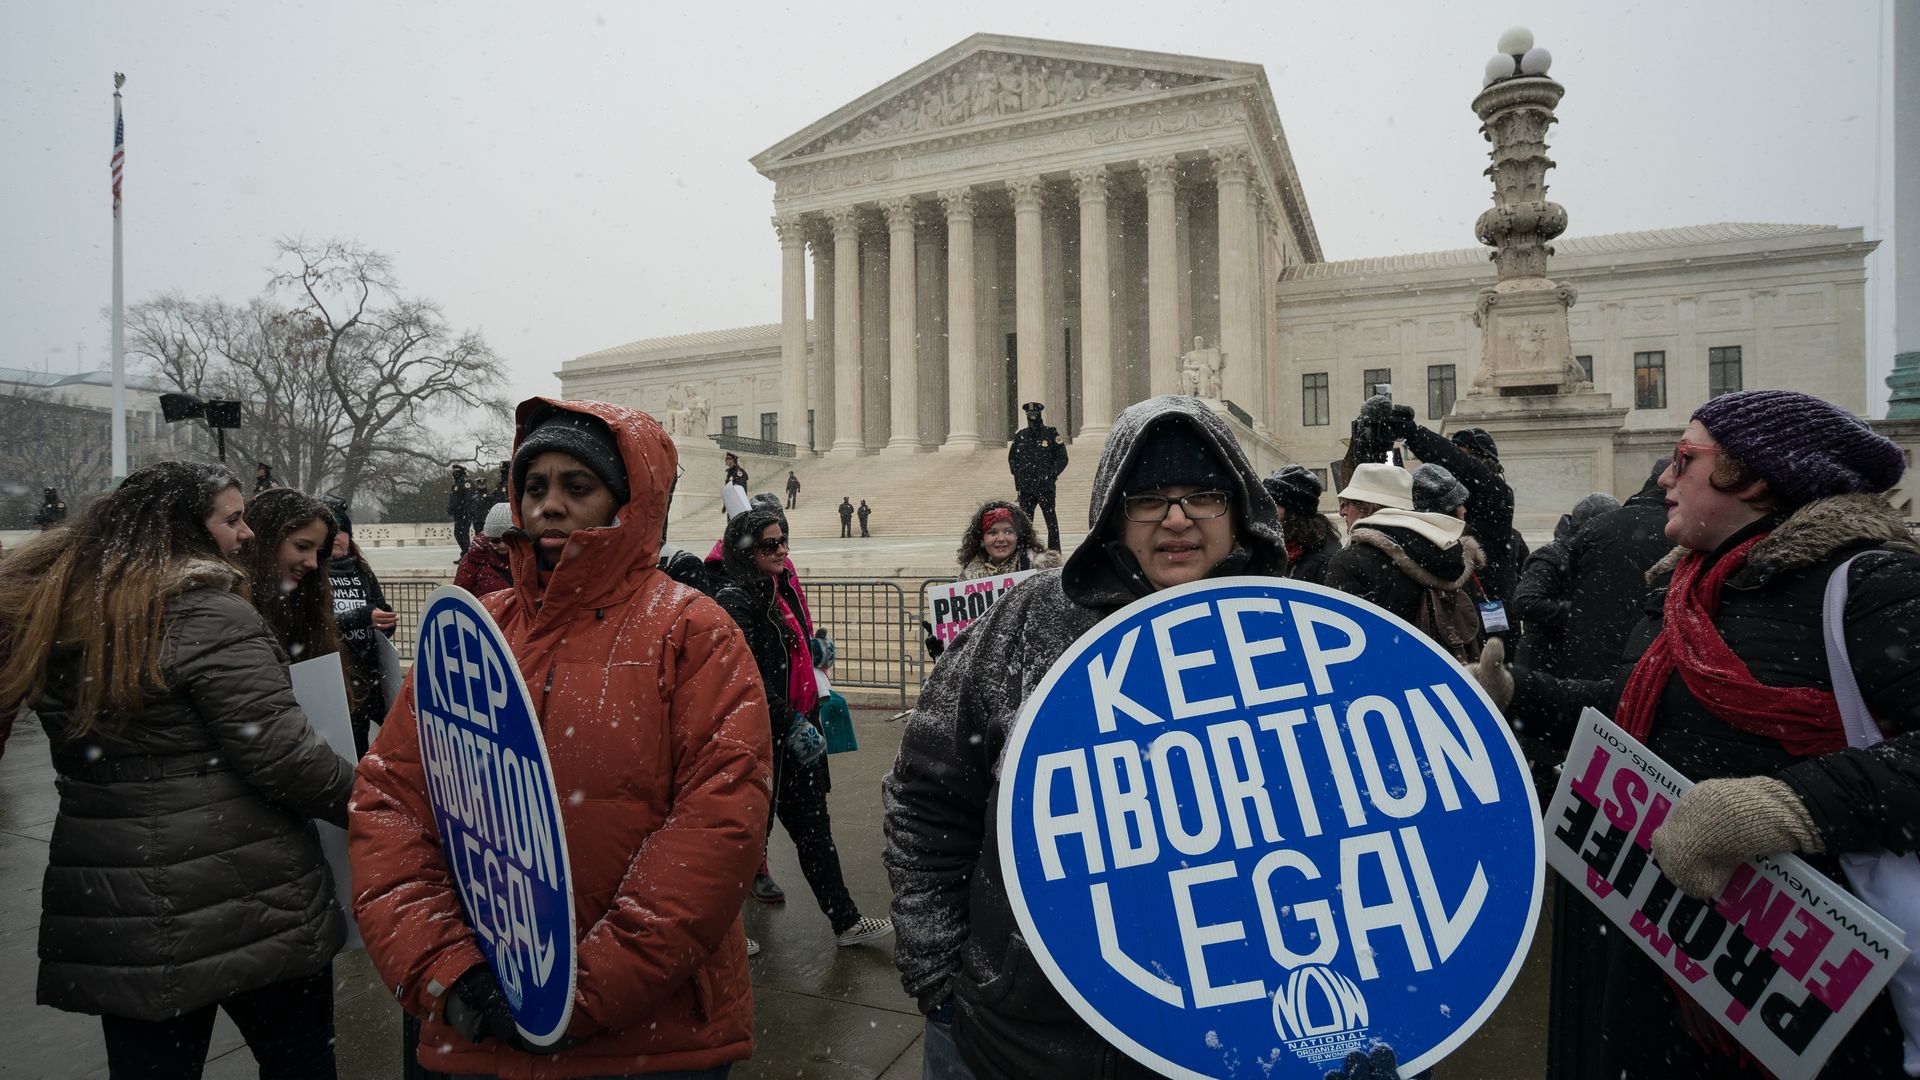 Protesters wave a "Keep Abortion Legal" sign outside the Supreme Court